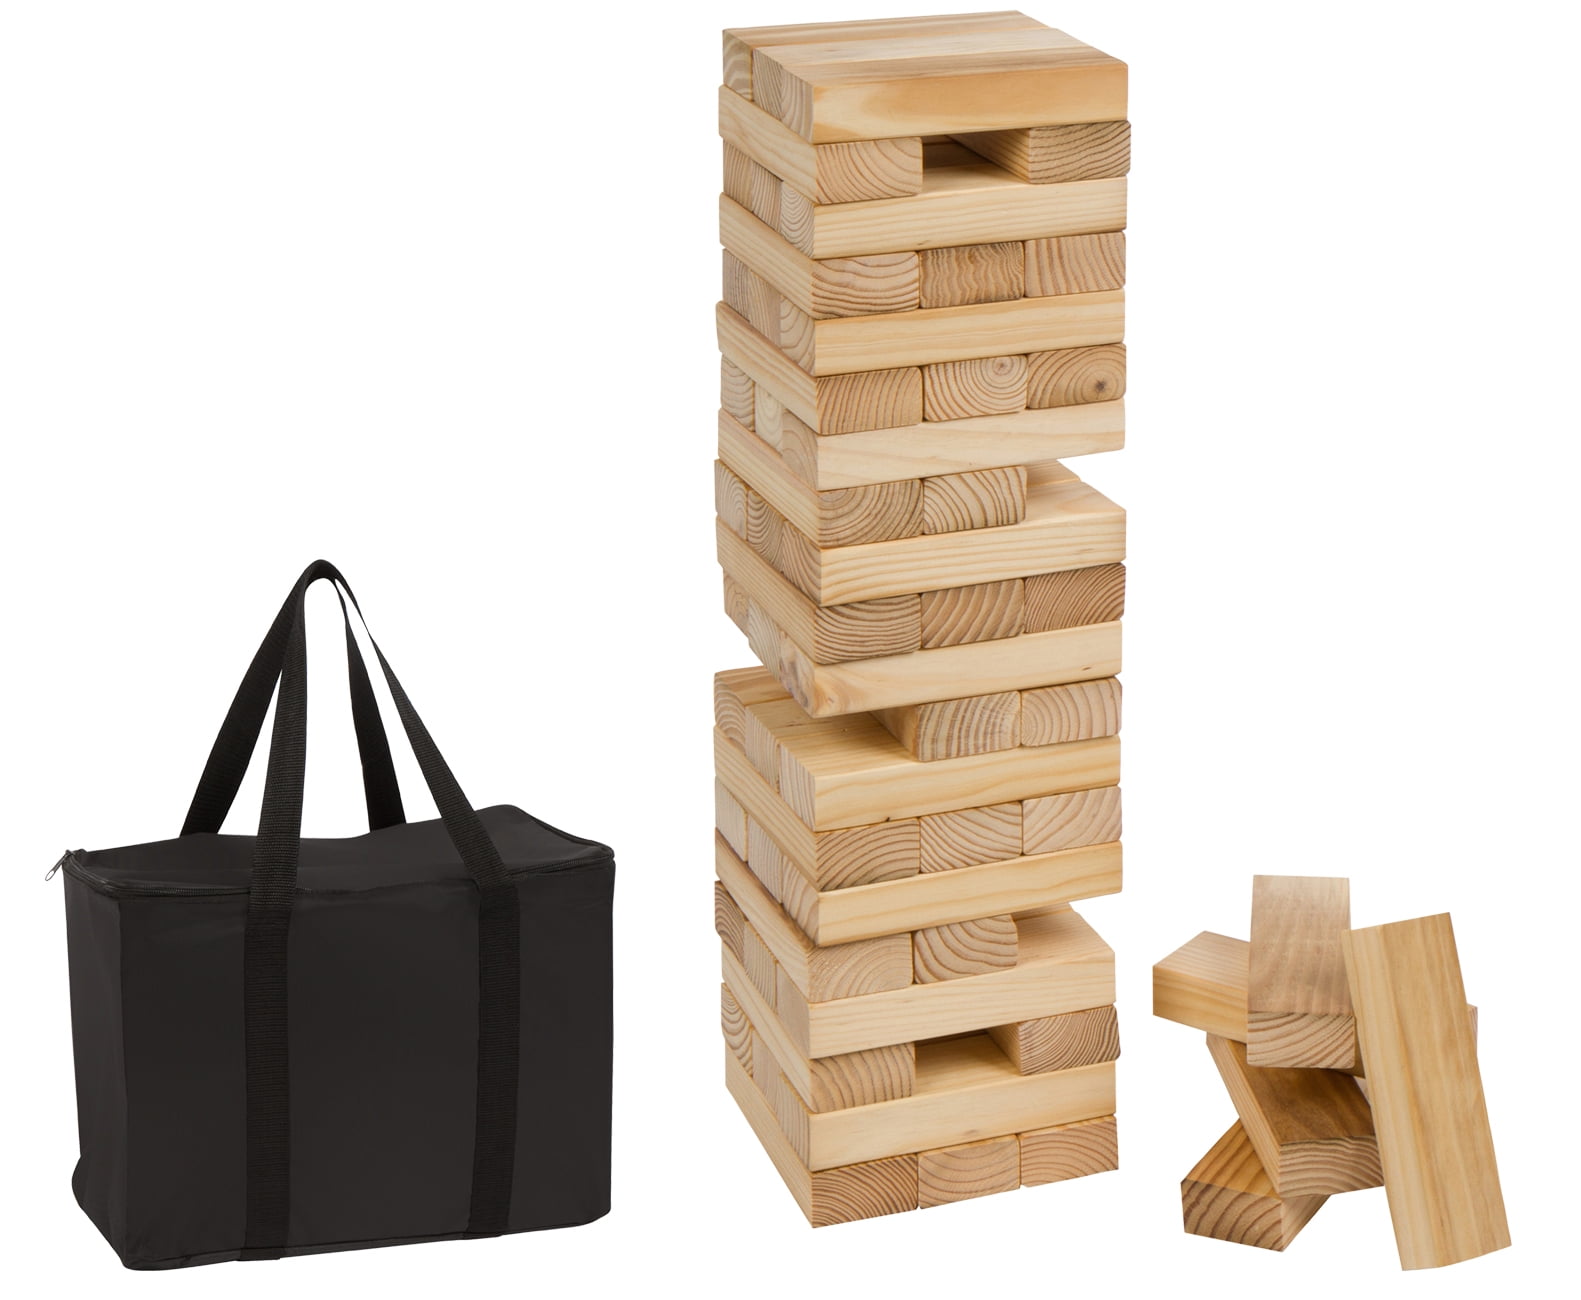 48Piece 1.5Tall Giant Wooden Stacking Puzzle Game with Carry Case by Trademark Innovations 